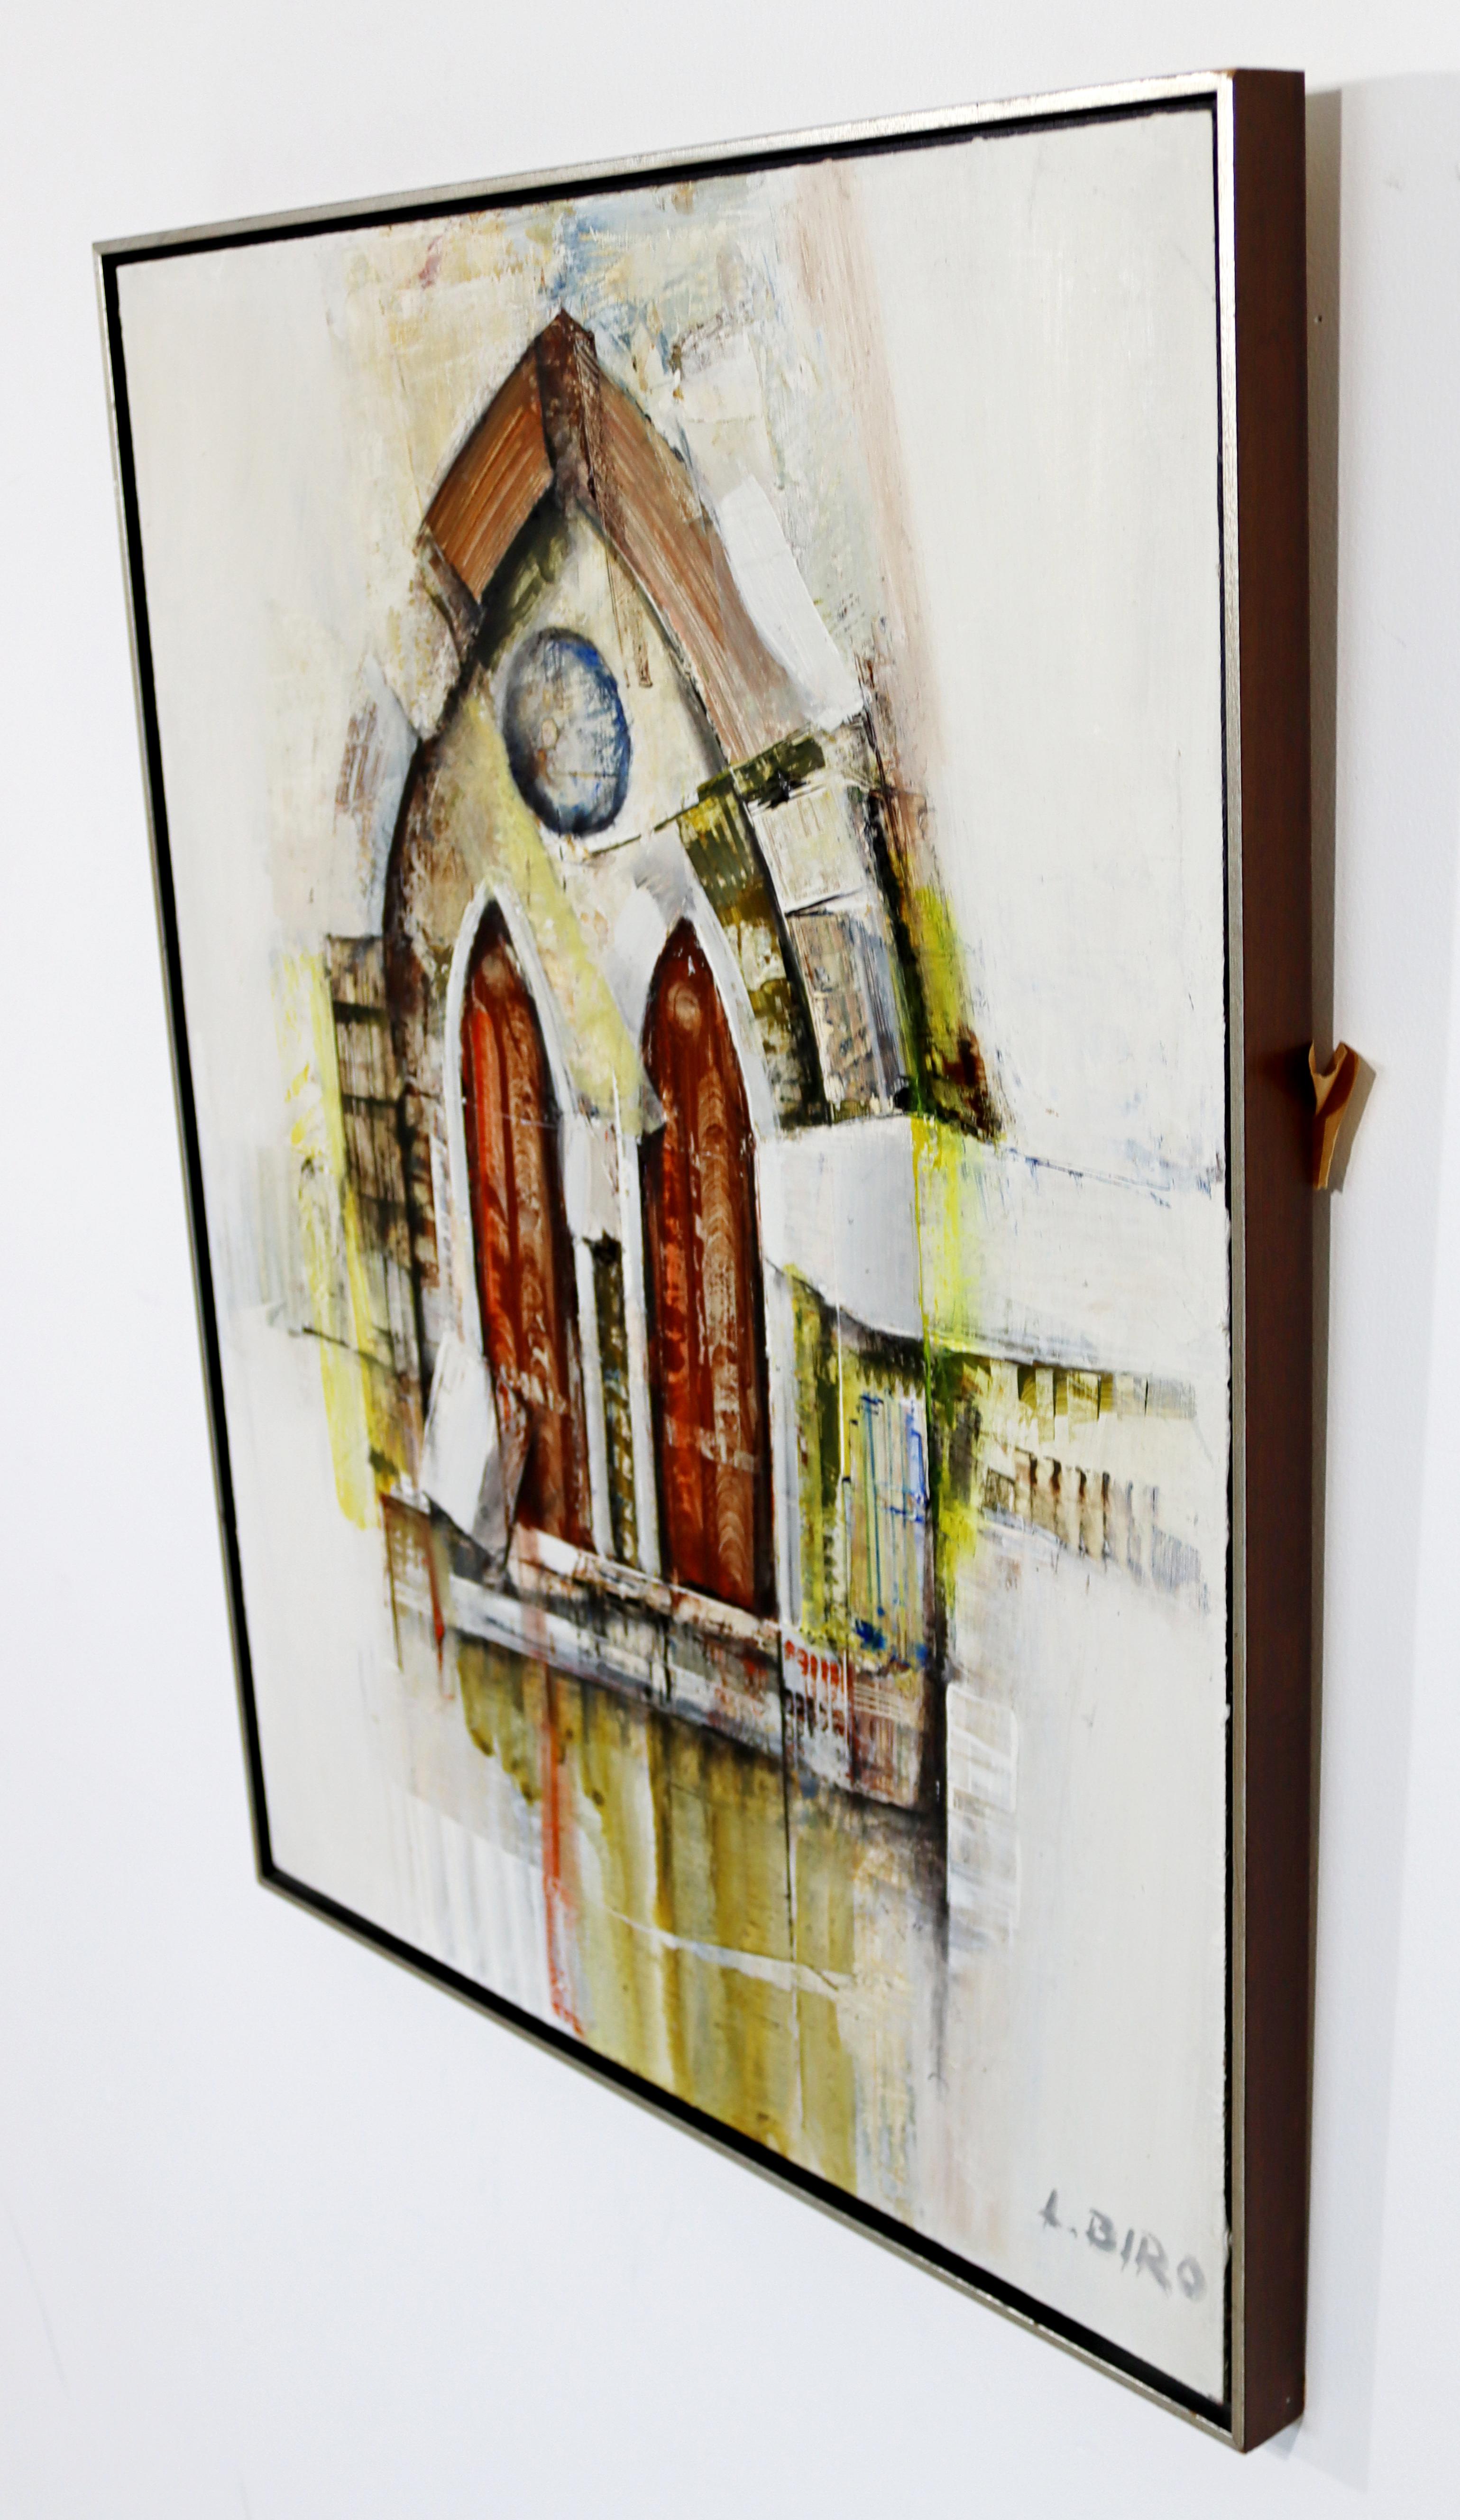 Late 20th Century Mid-Century Modern Framed L. Biro Signed Oil on Board Painting Chapel 1970s